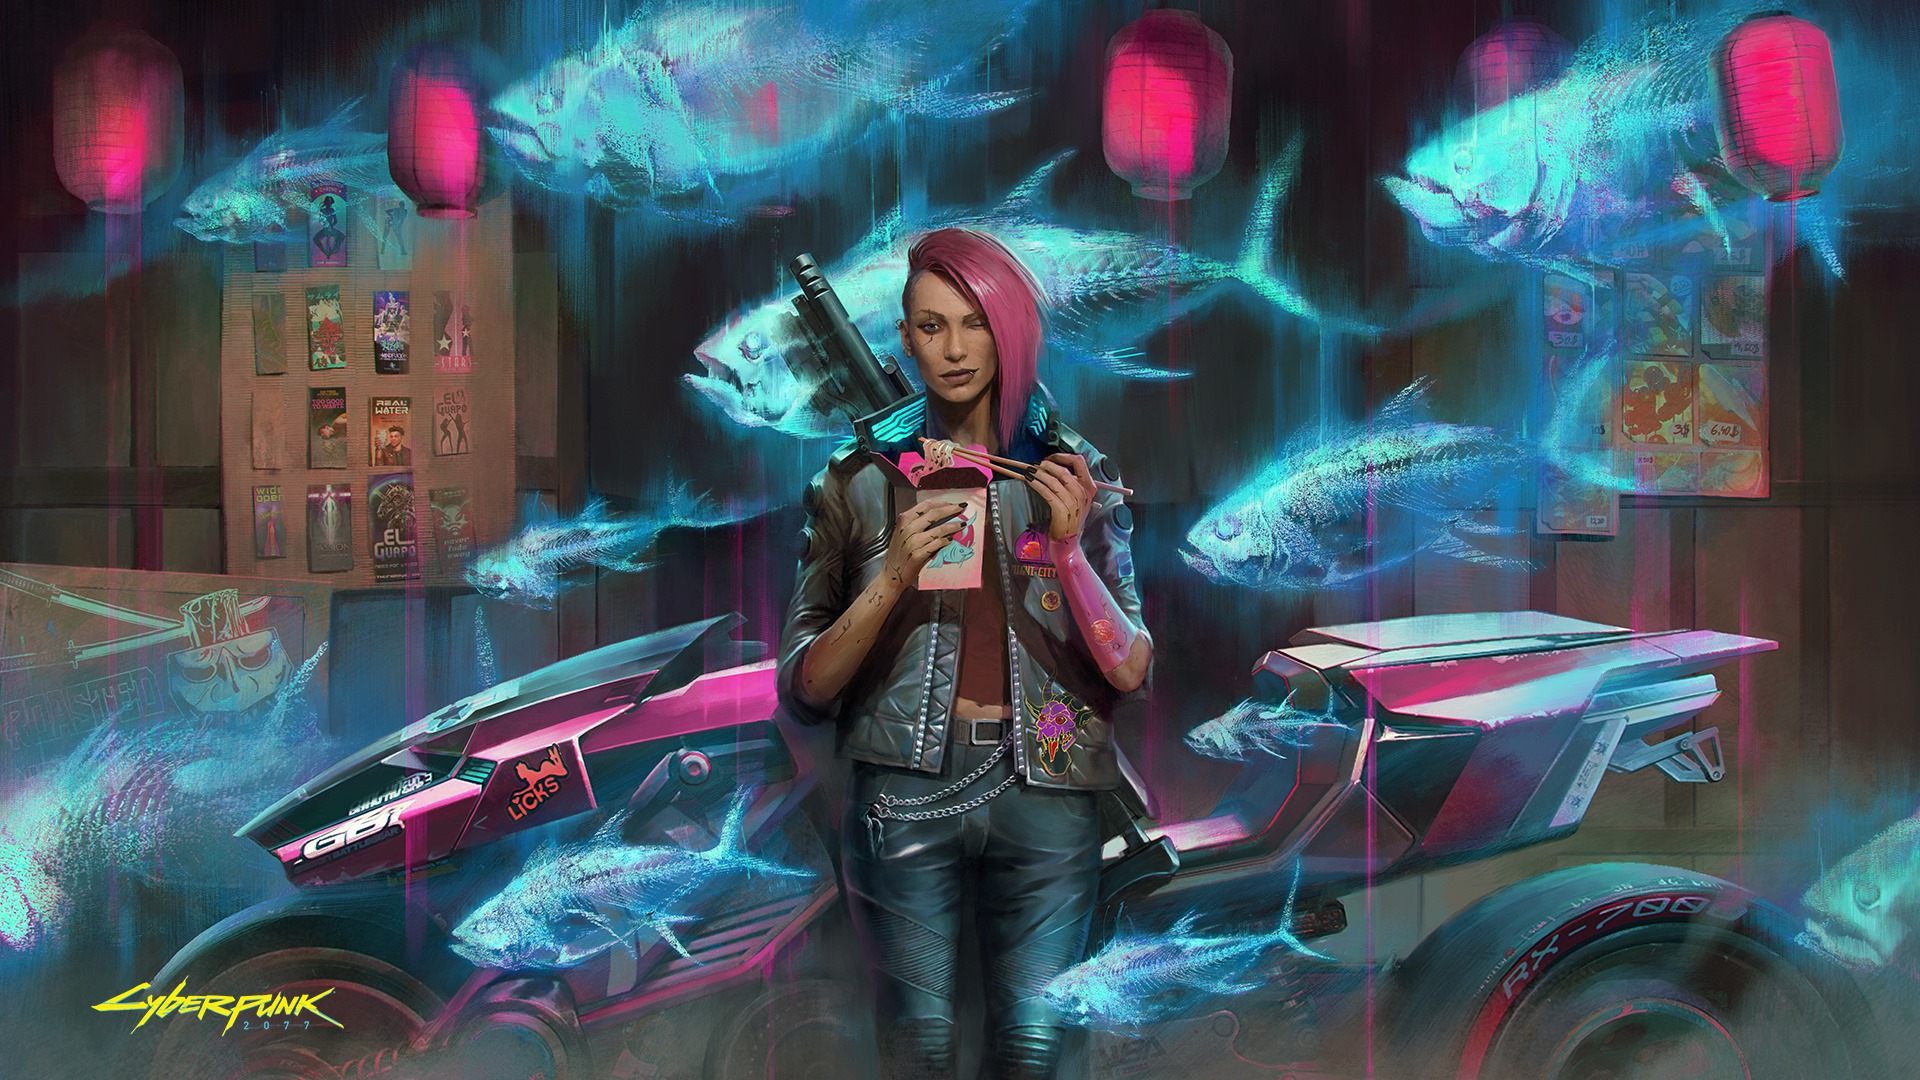 Attitude One Eye Closed Wink Noodles Food Cyberpunk 2077 Video Games Motorcycle Video Game Art Chops 1920x1080